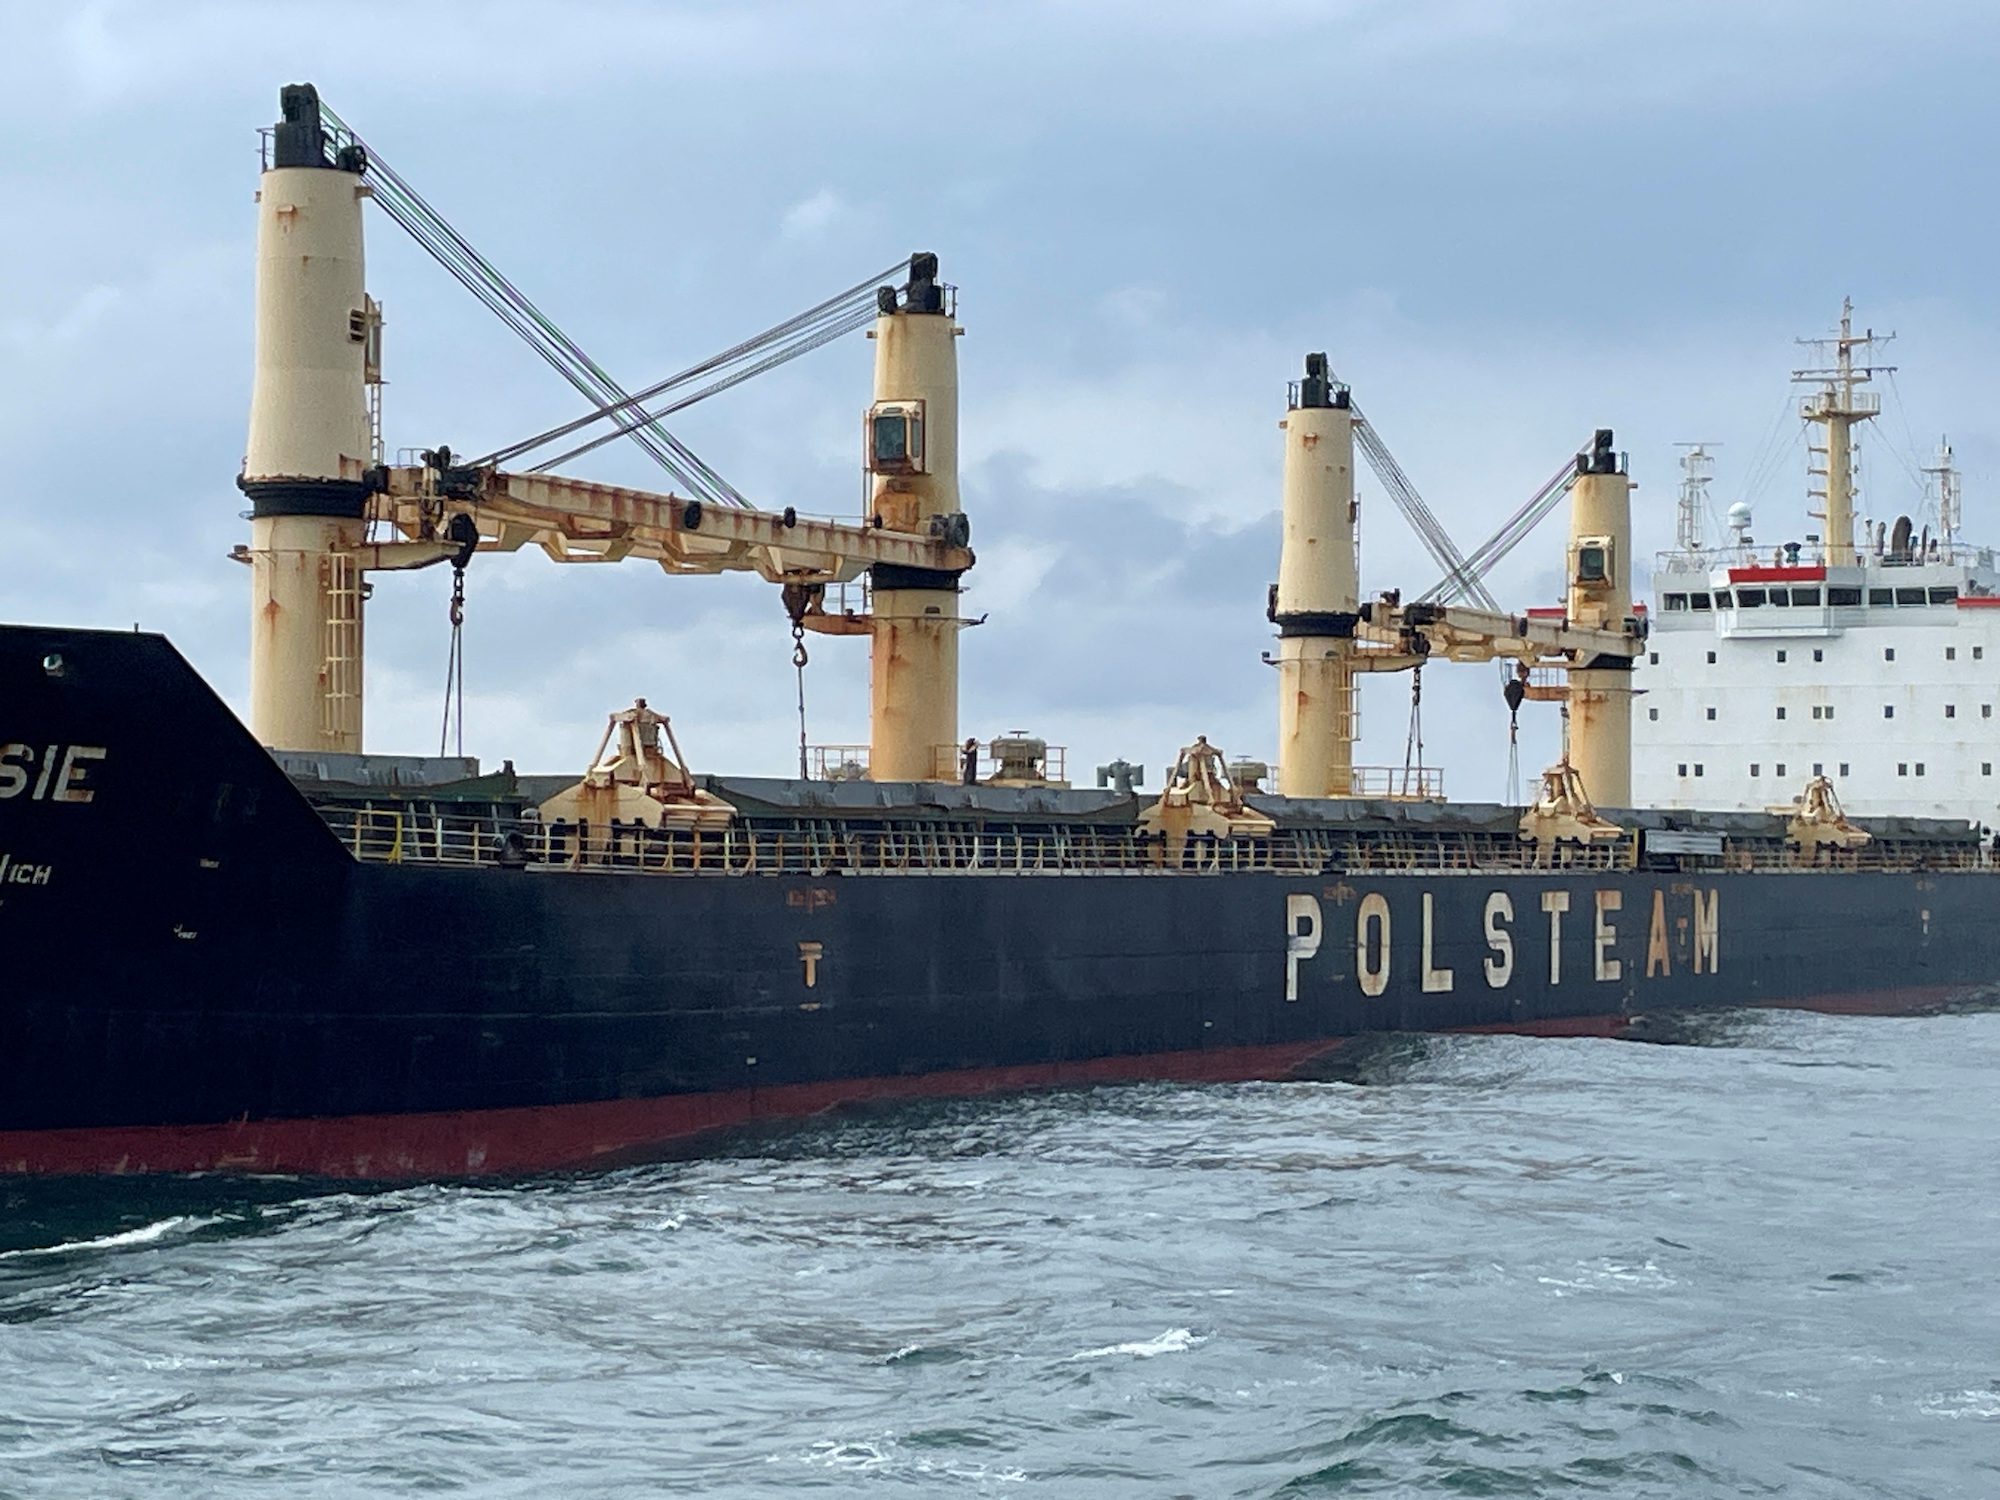 The Polesie is pictured following its collision with the Verity in the German North Sea Bight